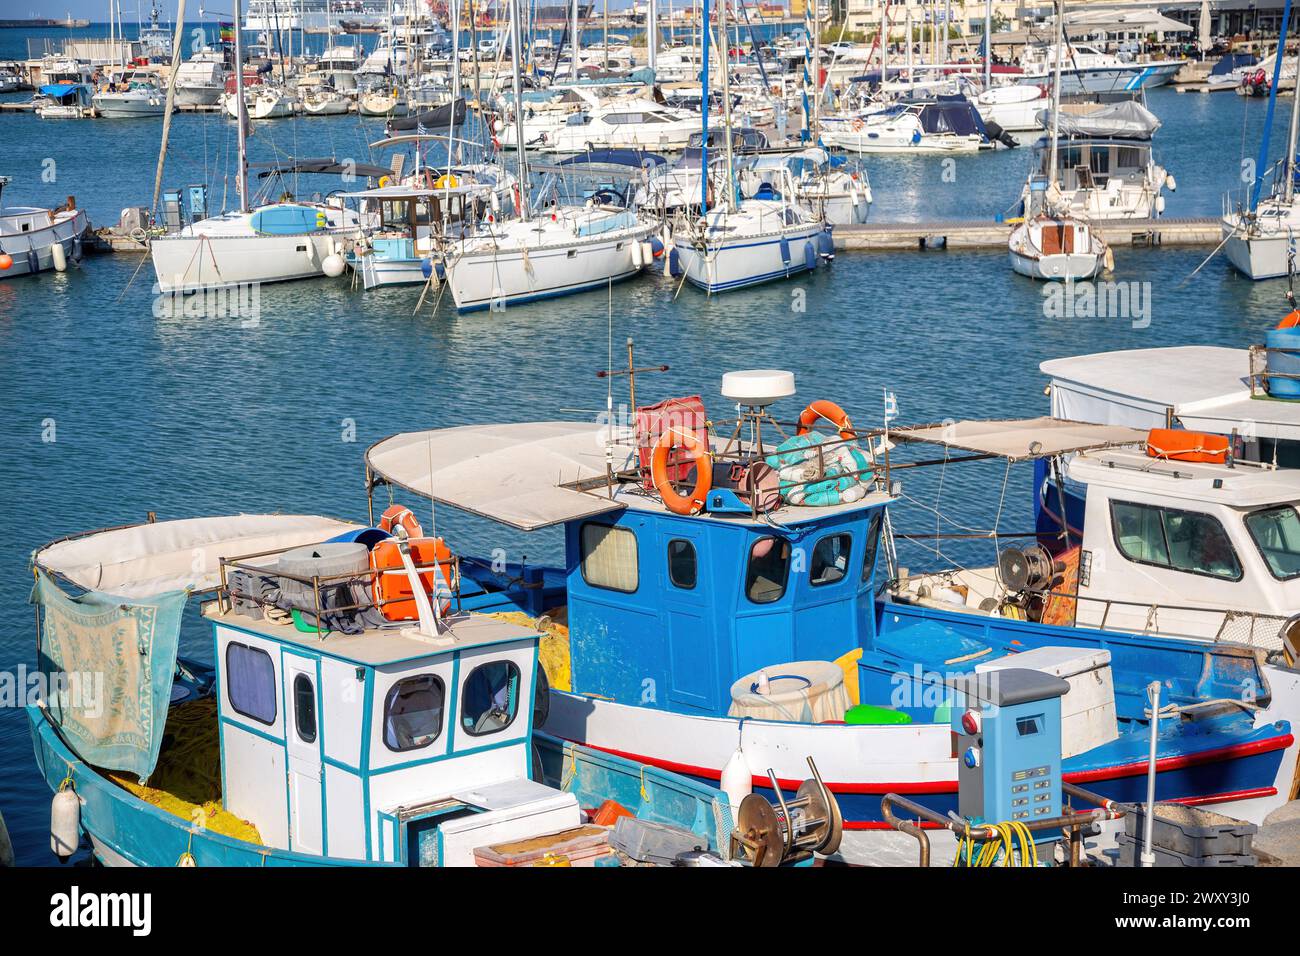 Crete island, destination Greece. Moored vessel with mast and fishing boat at Heraklion old Venetian harbor, calm sea water, blue sky background. Stock Photo